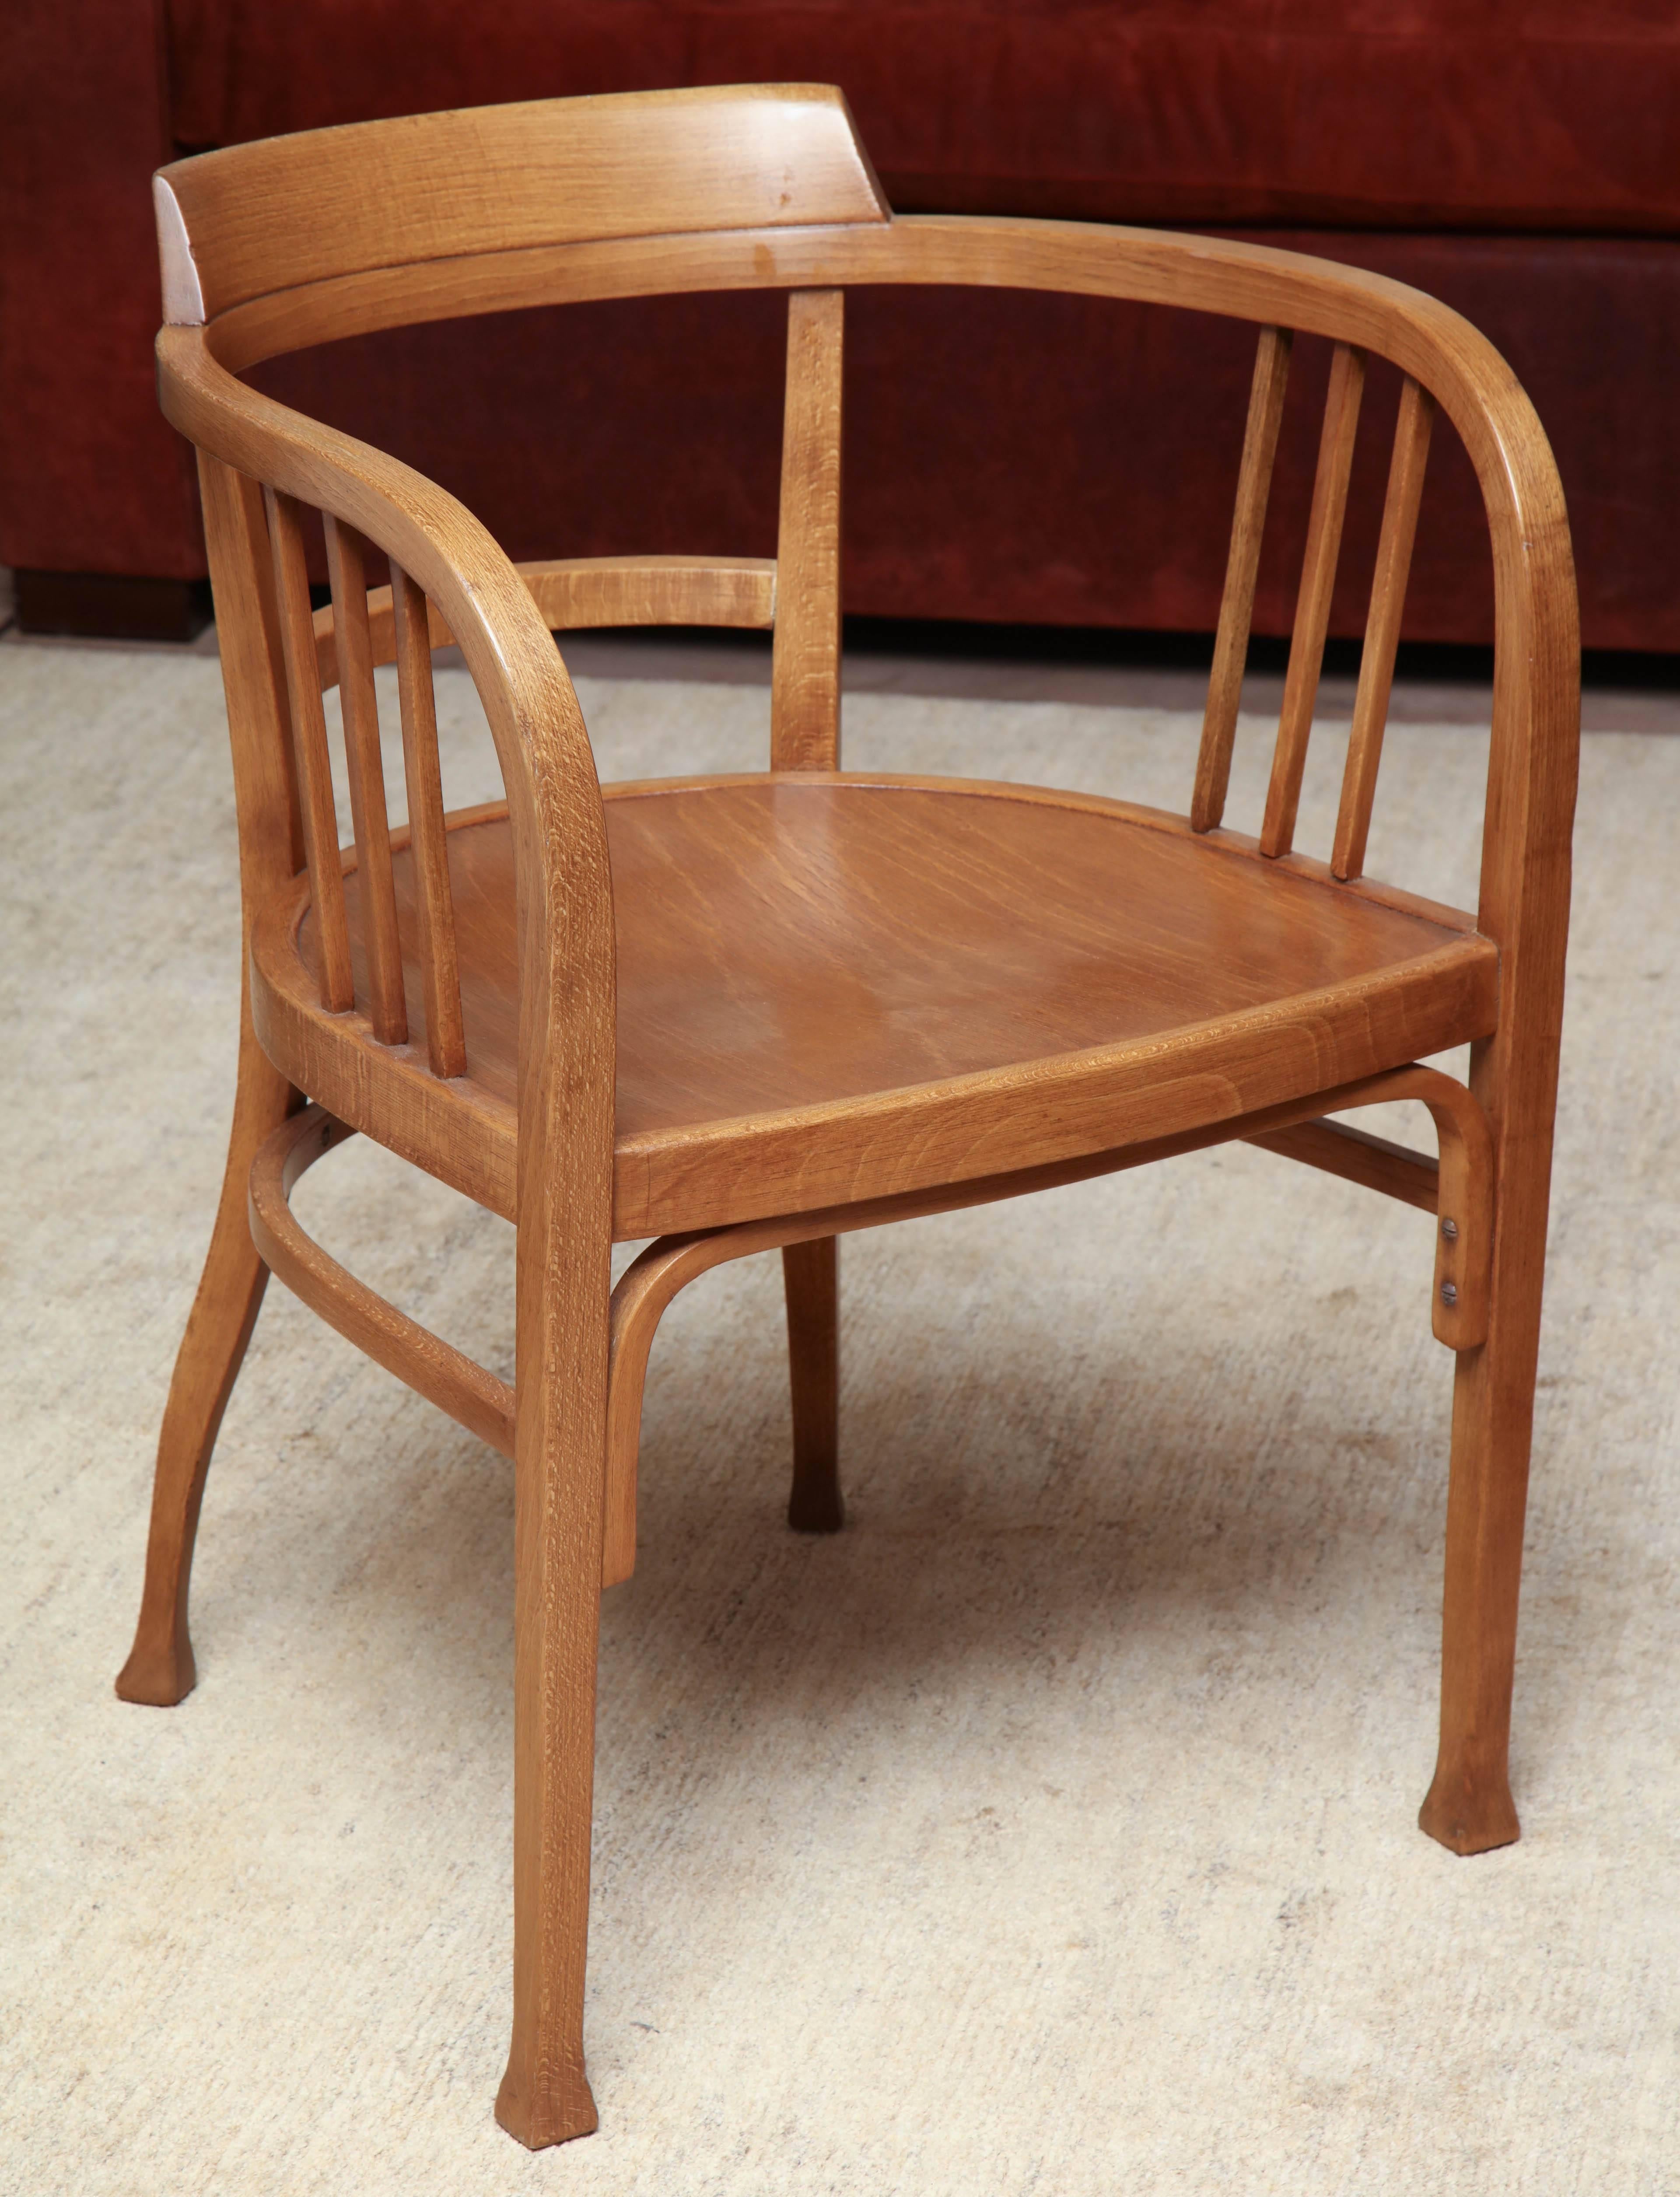 Pale honey finished Thonet armchair in the manner of Otto Wagner, circa 1900.